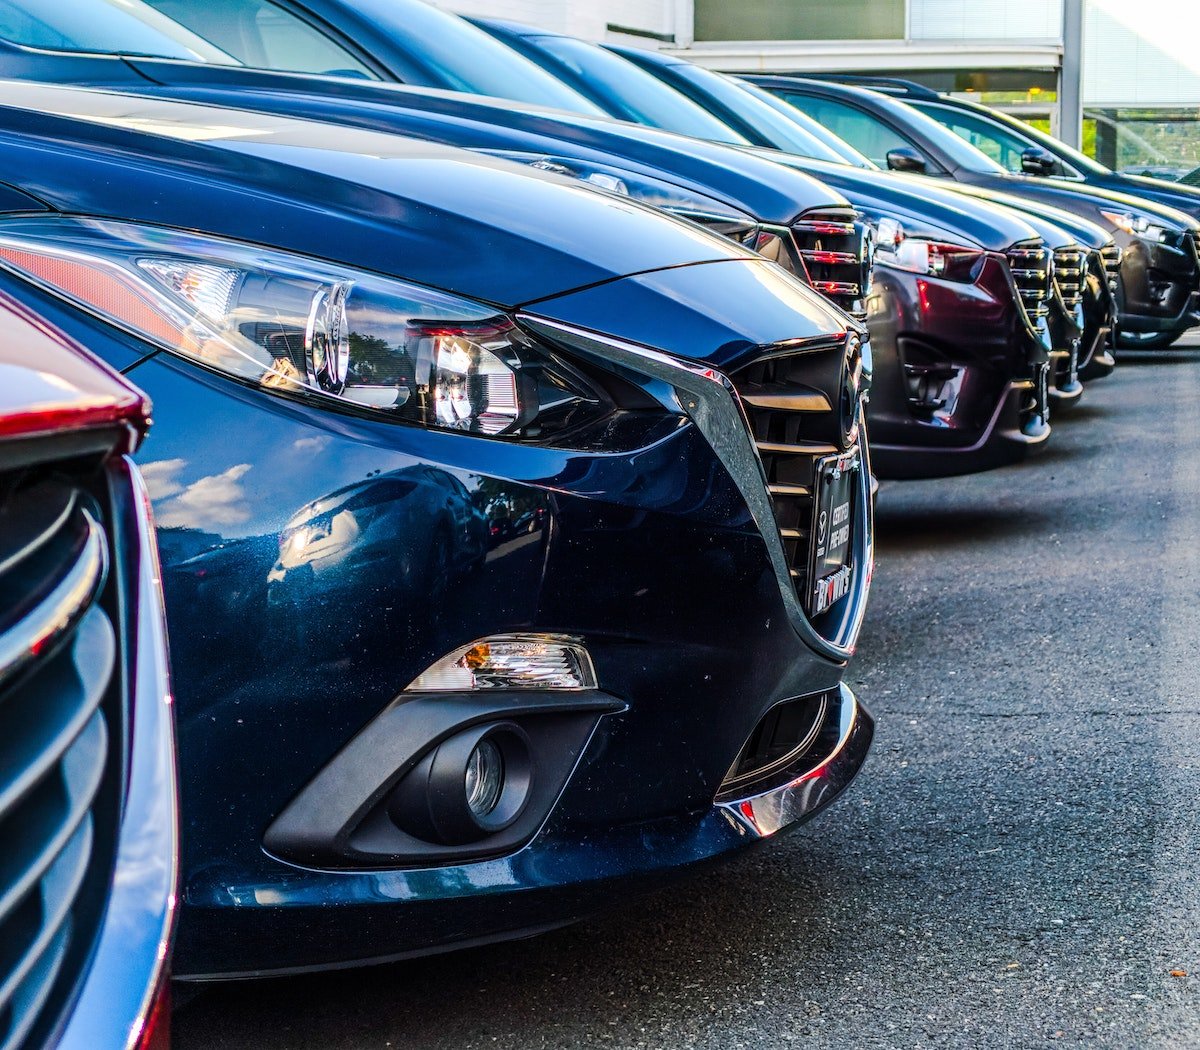 9 Auto Dealership Review Sites to Keep an Eye On